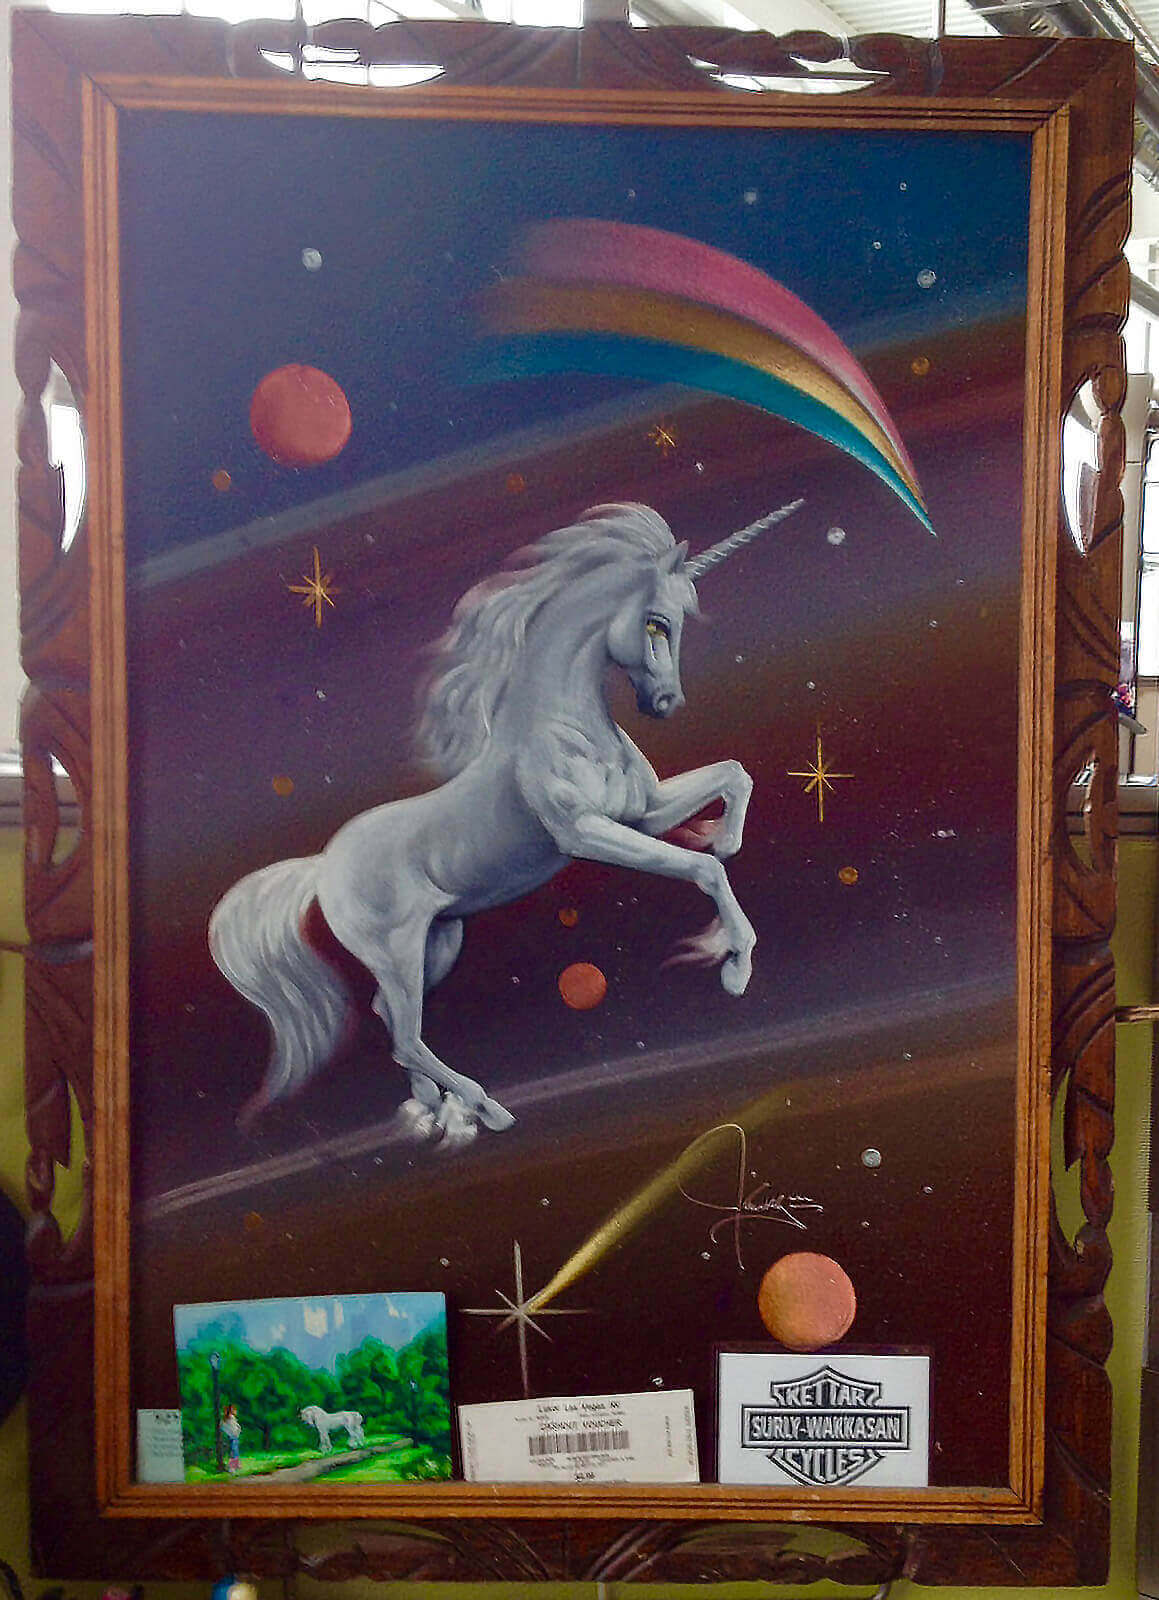 Framed, colored illustration of a unicorn, with planets, stars and a rainbow